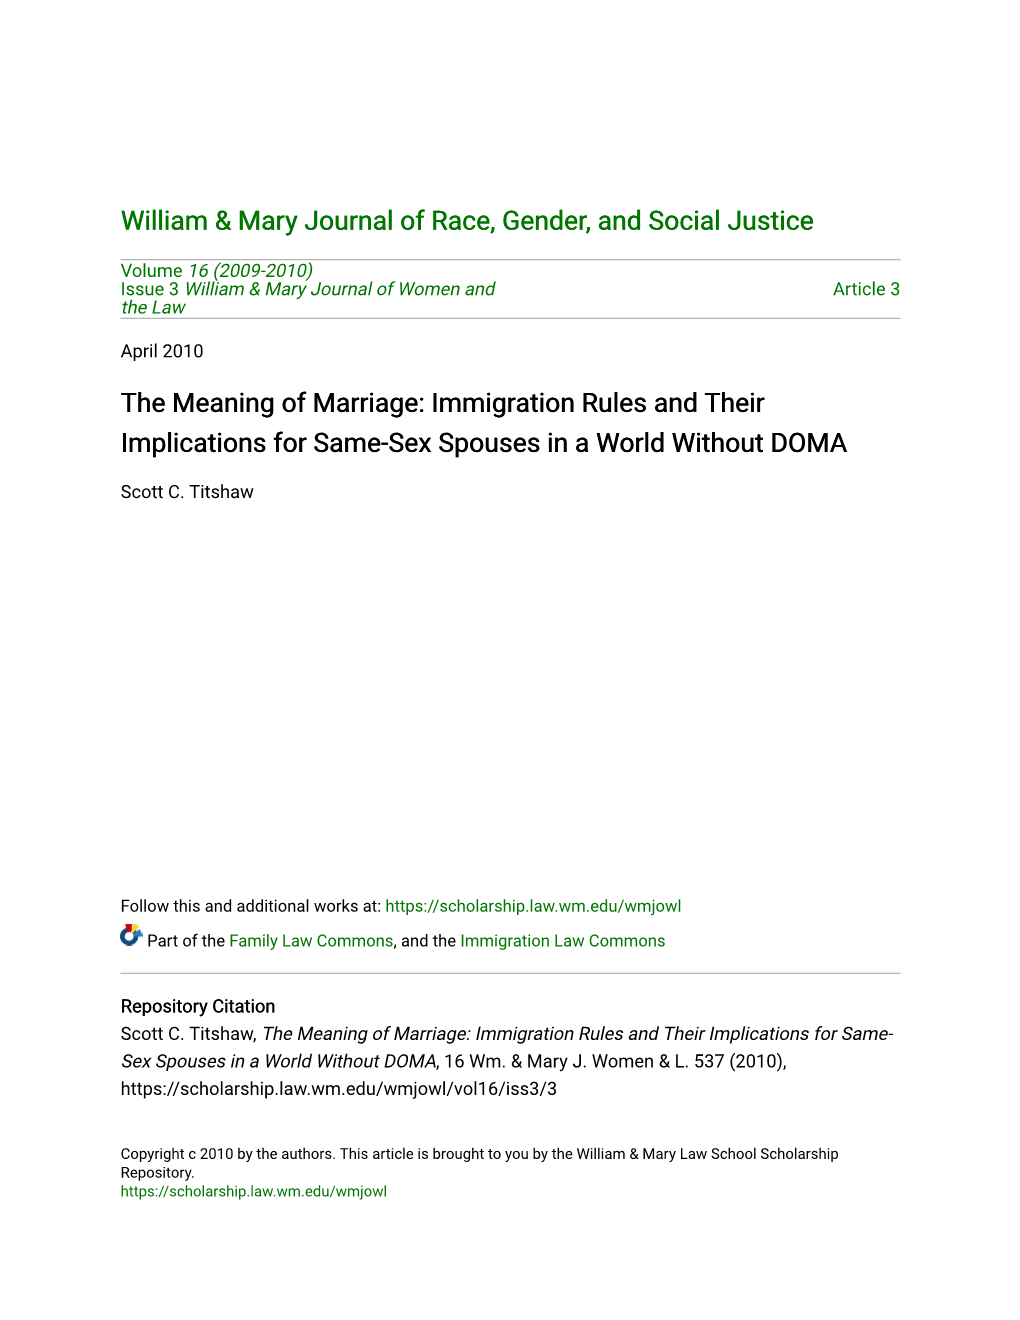 The Meaning of Marriage: Immigration Rules and Their Implications for Same-Sex Spouses in a World Without DOMA